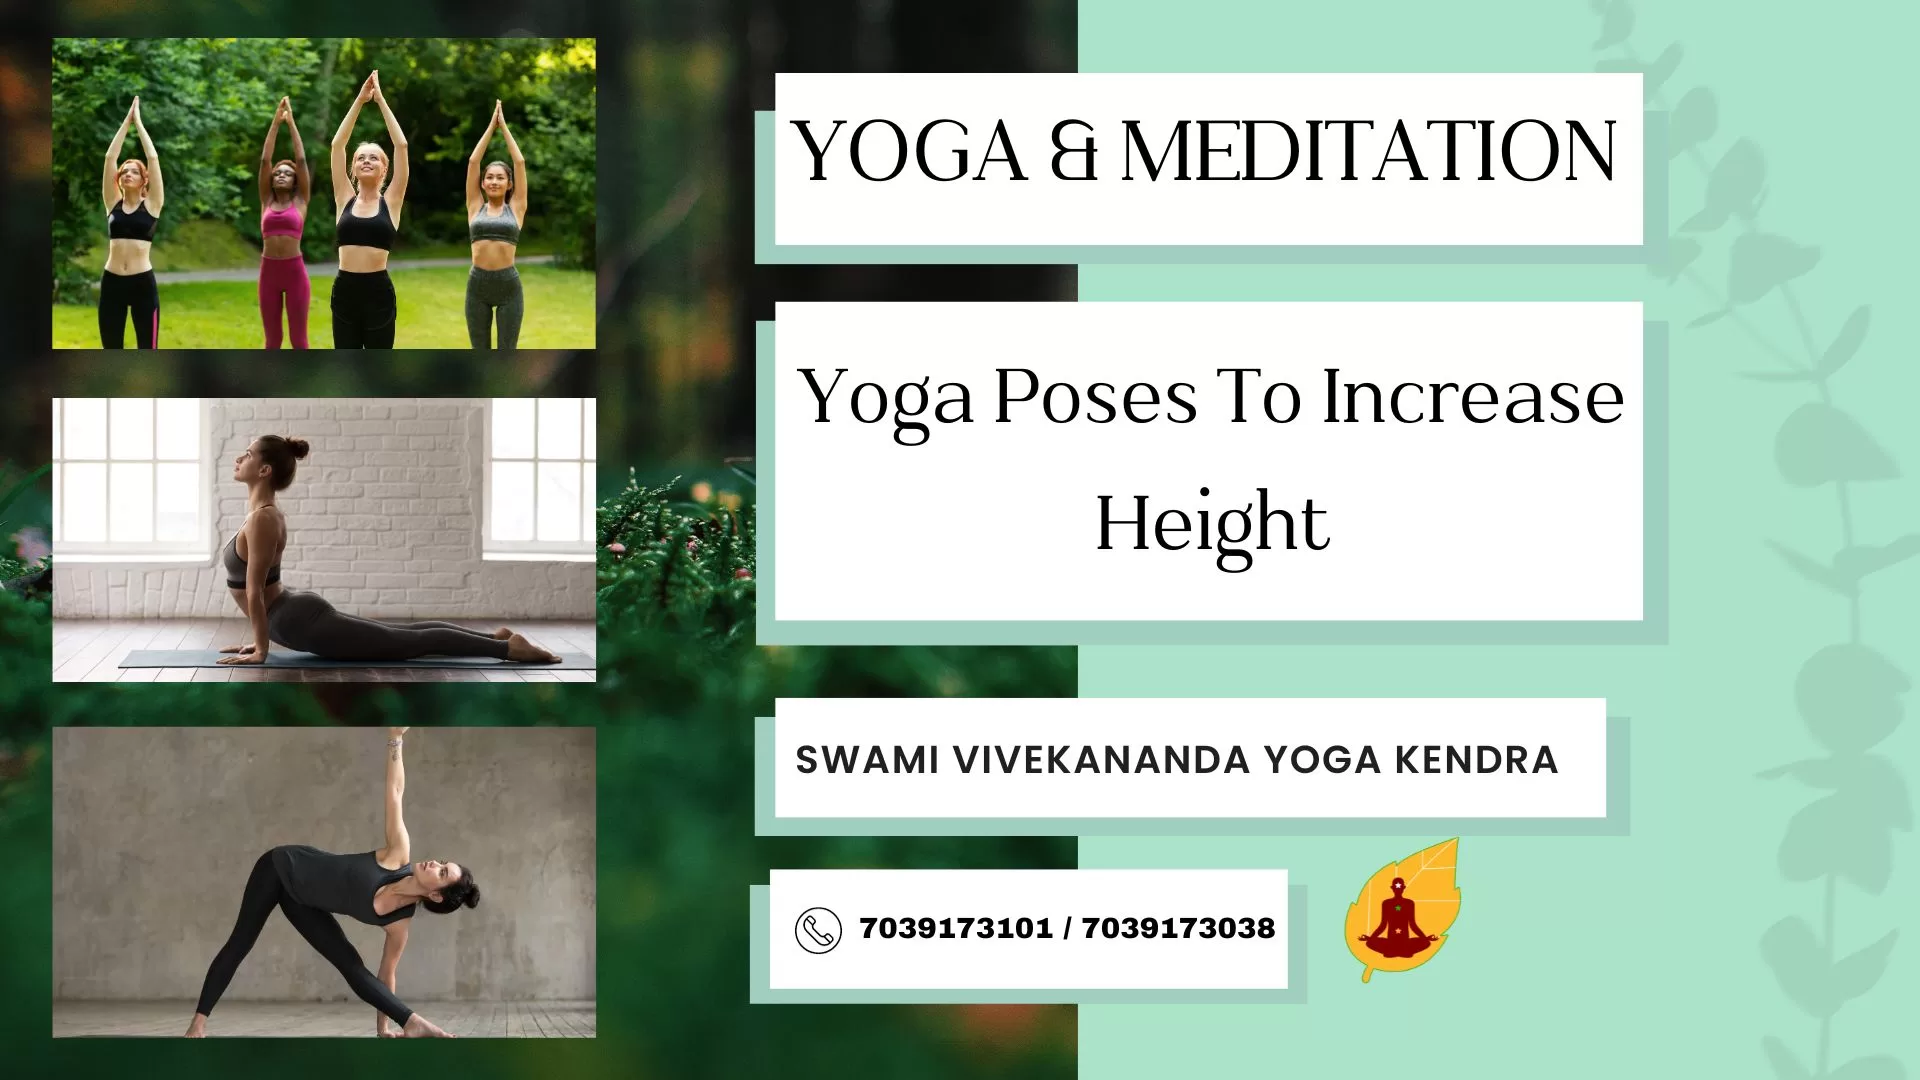 10 Most Effective Yoga Poses to Increase Height - YouTube